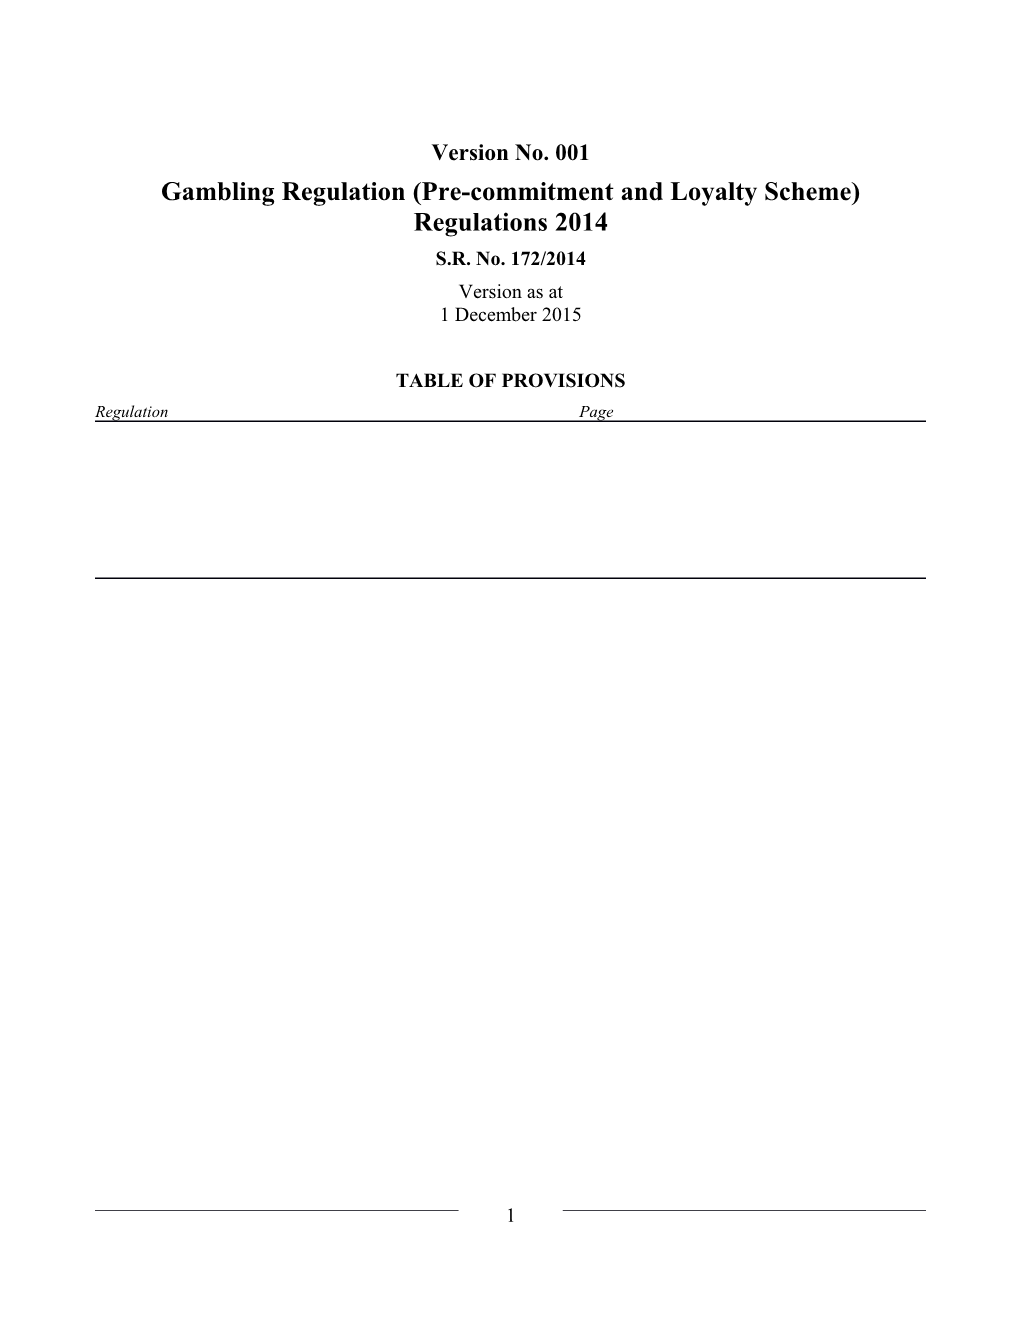 Gambling Regulation (Pre-Commitment and Loyalty Scheme) Regulations 2014